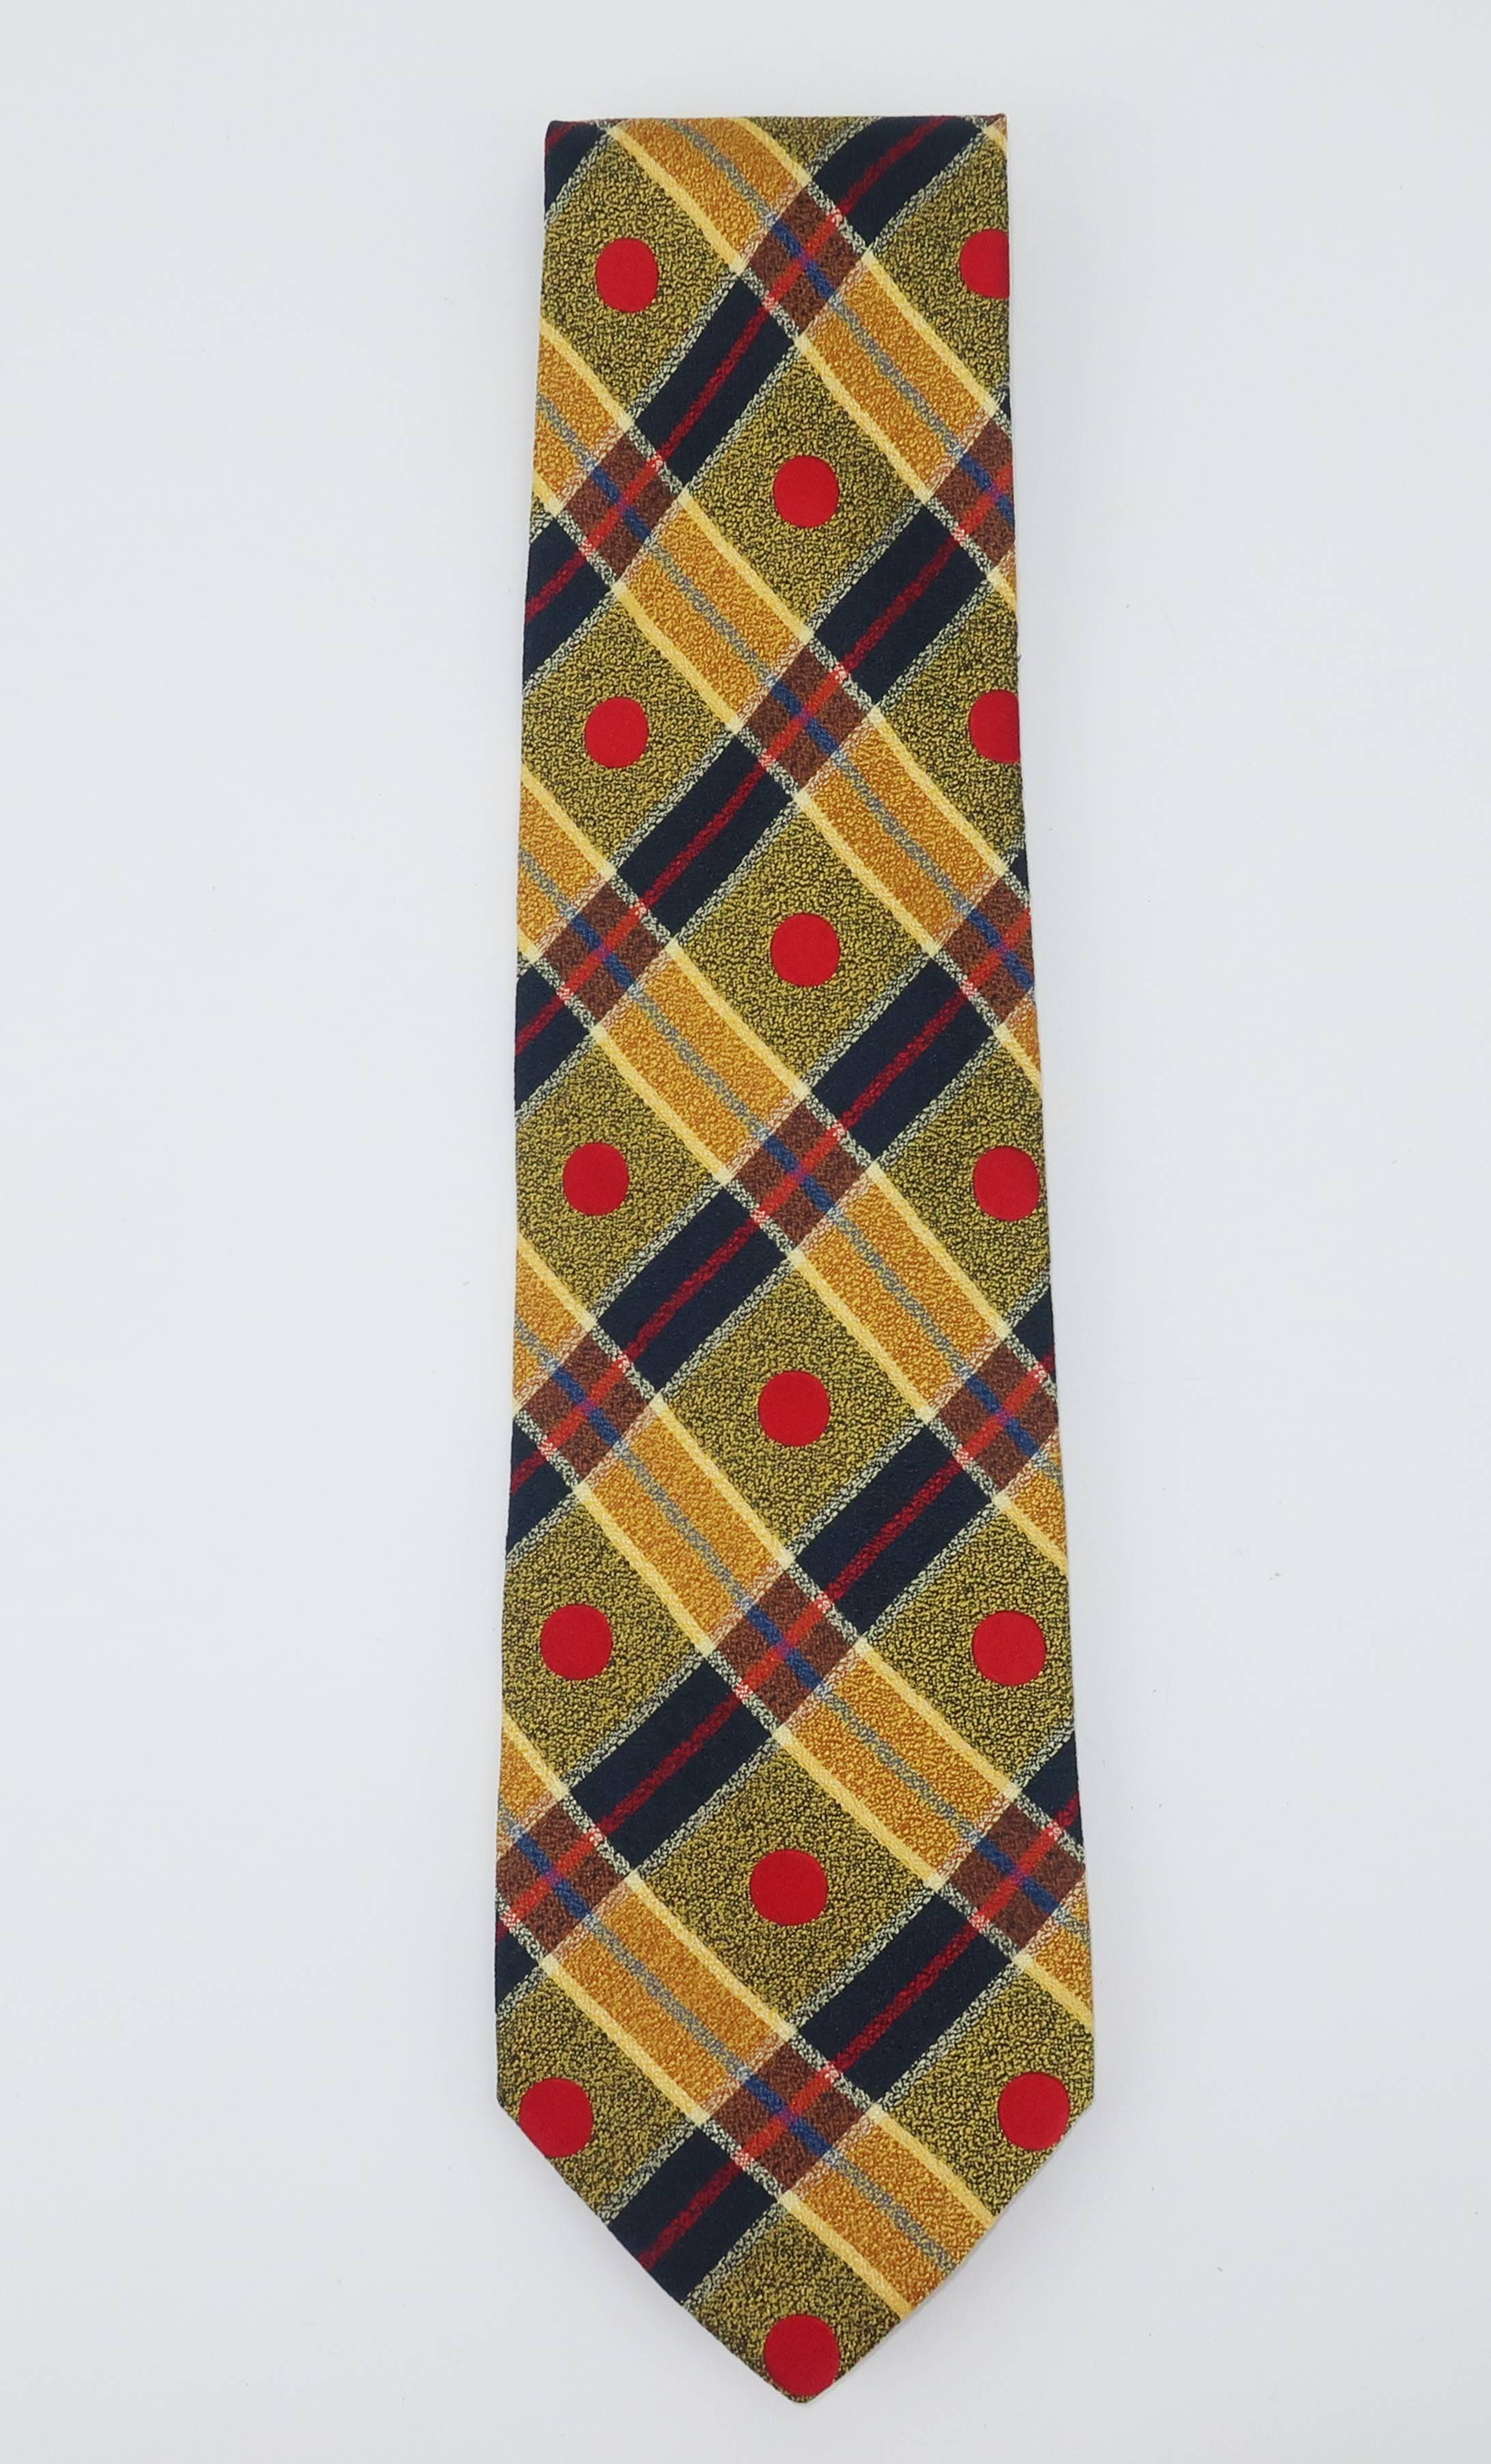 Emanuel Ungaro creates a visually vibrant men's necktie from a plaid patterned silk incorporating blue, gold and crimson red.  Perfect fashion statement to update your favorite suit.
MEASUREMENTS
The necktie measures 56.5